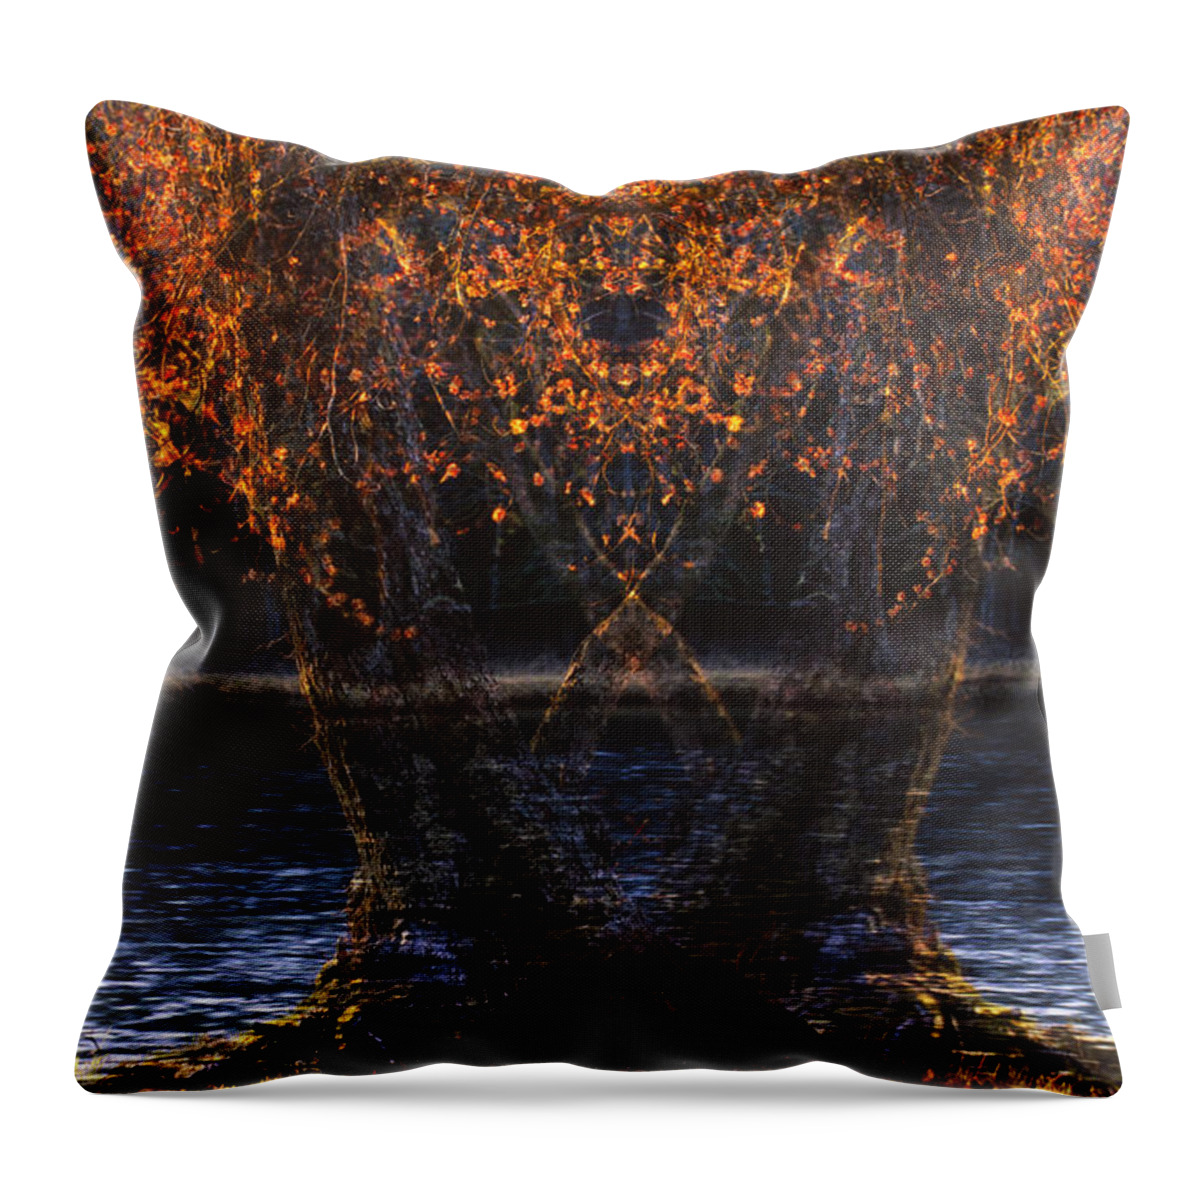 Abstract Throw Pillow featuring the photograph Tree Apparitions  by Irwin Barrett